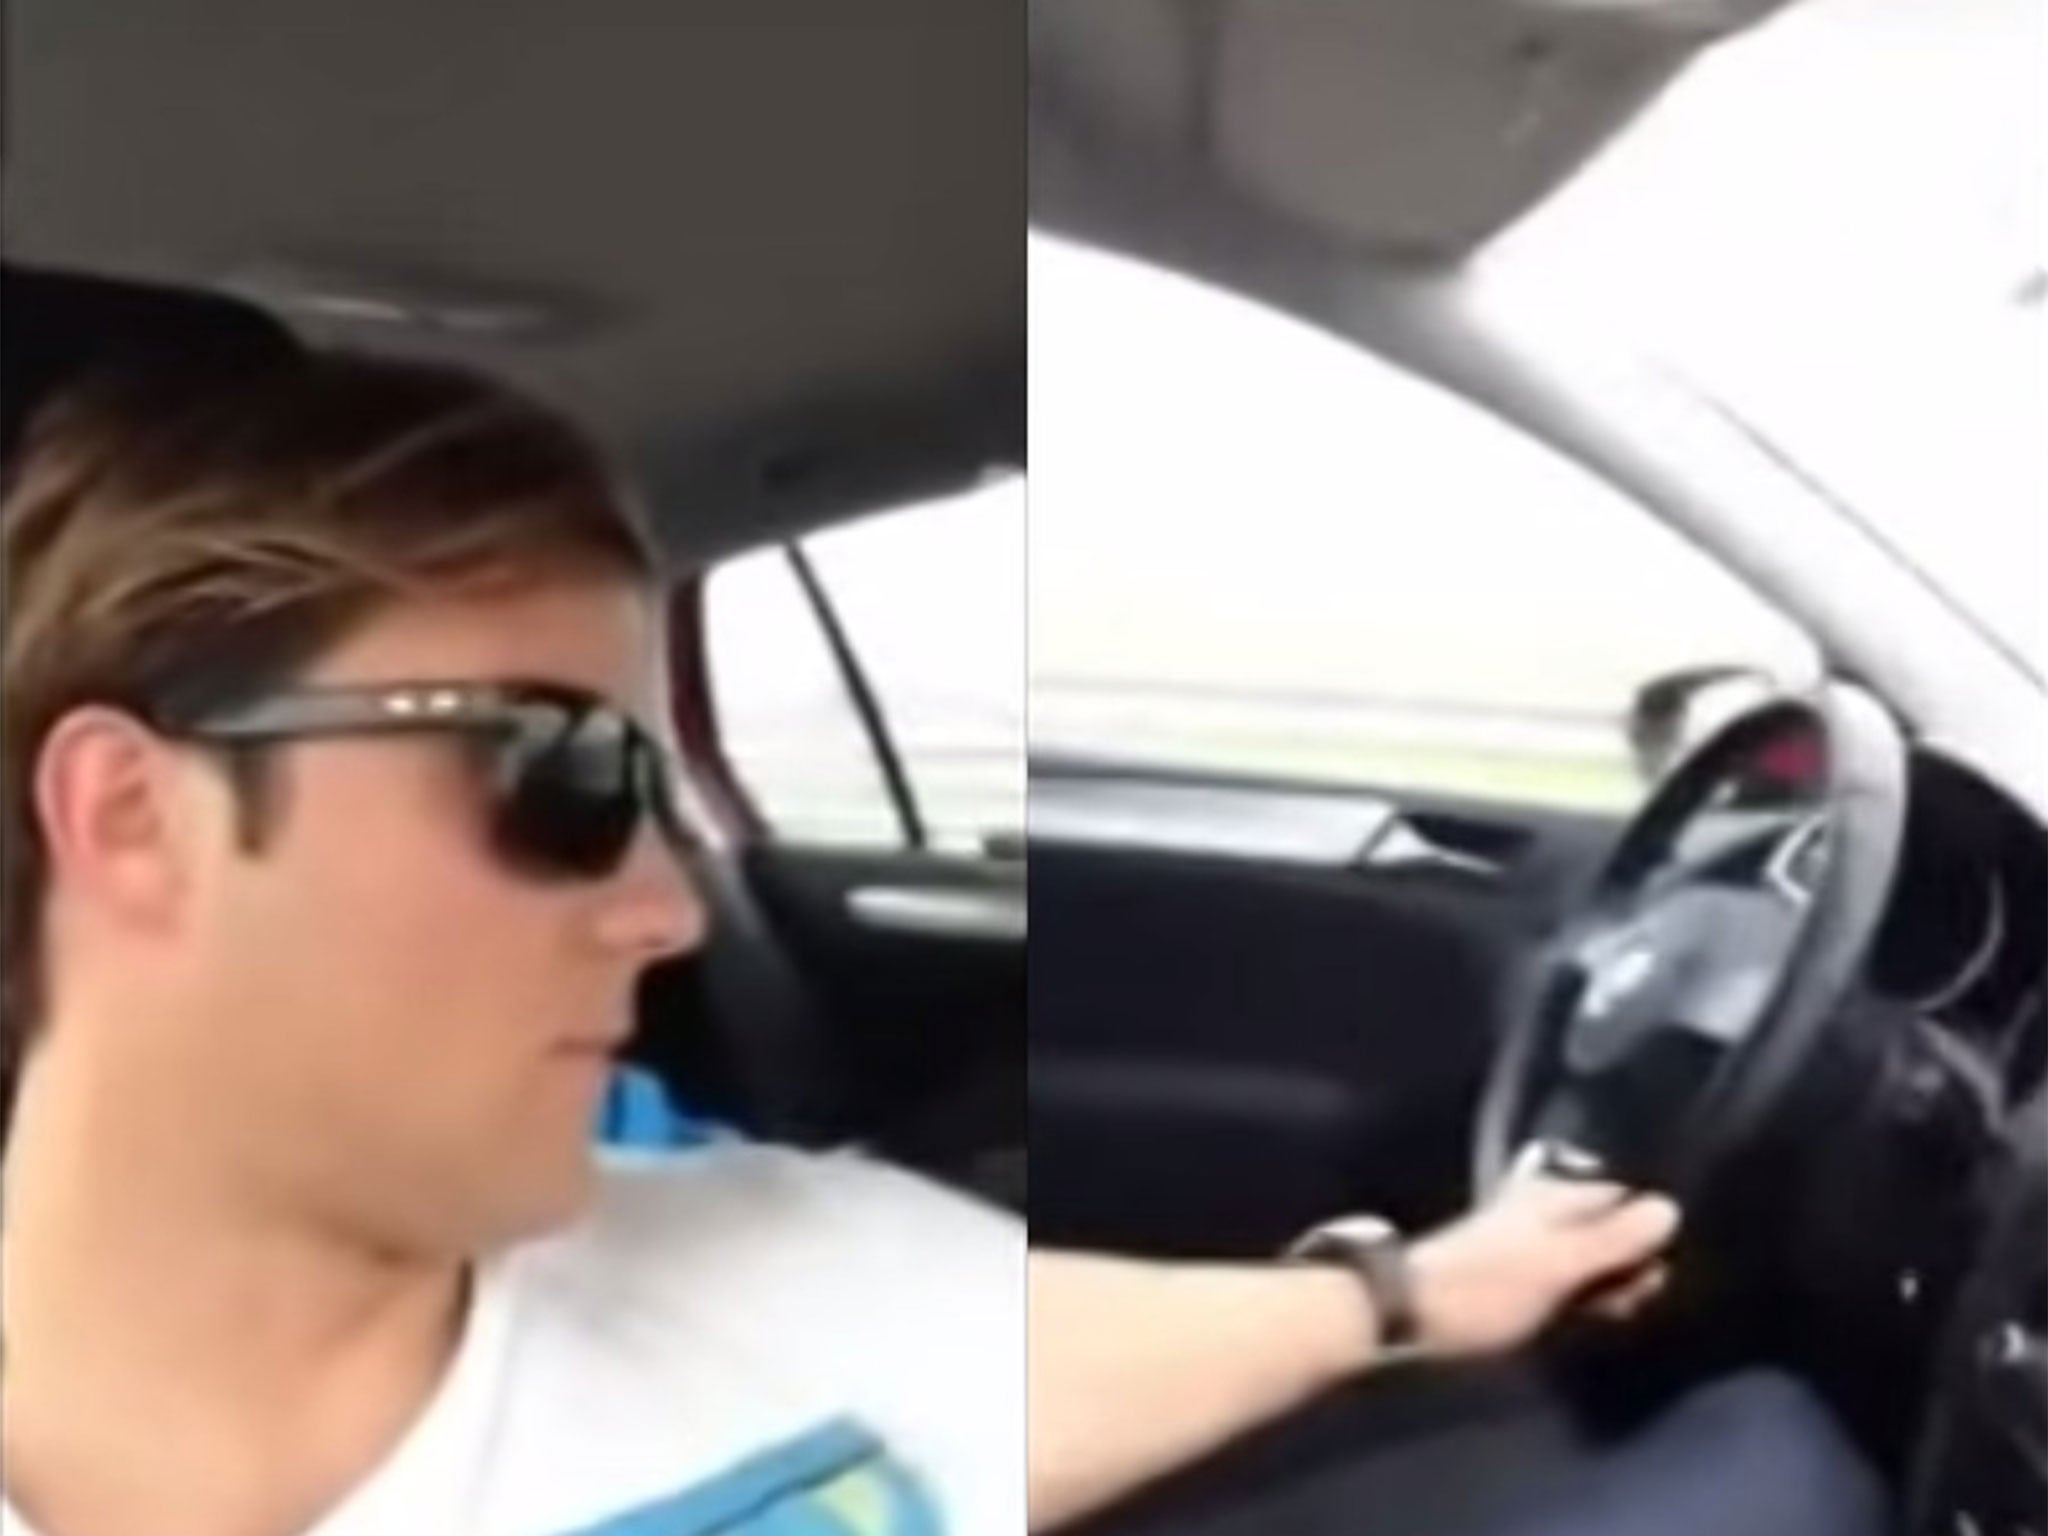 Spanish man posts video of himself driving from the passenger seat